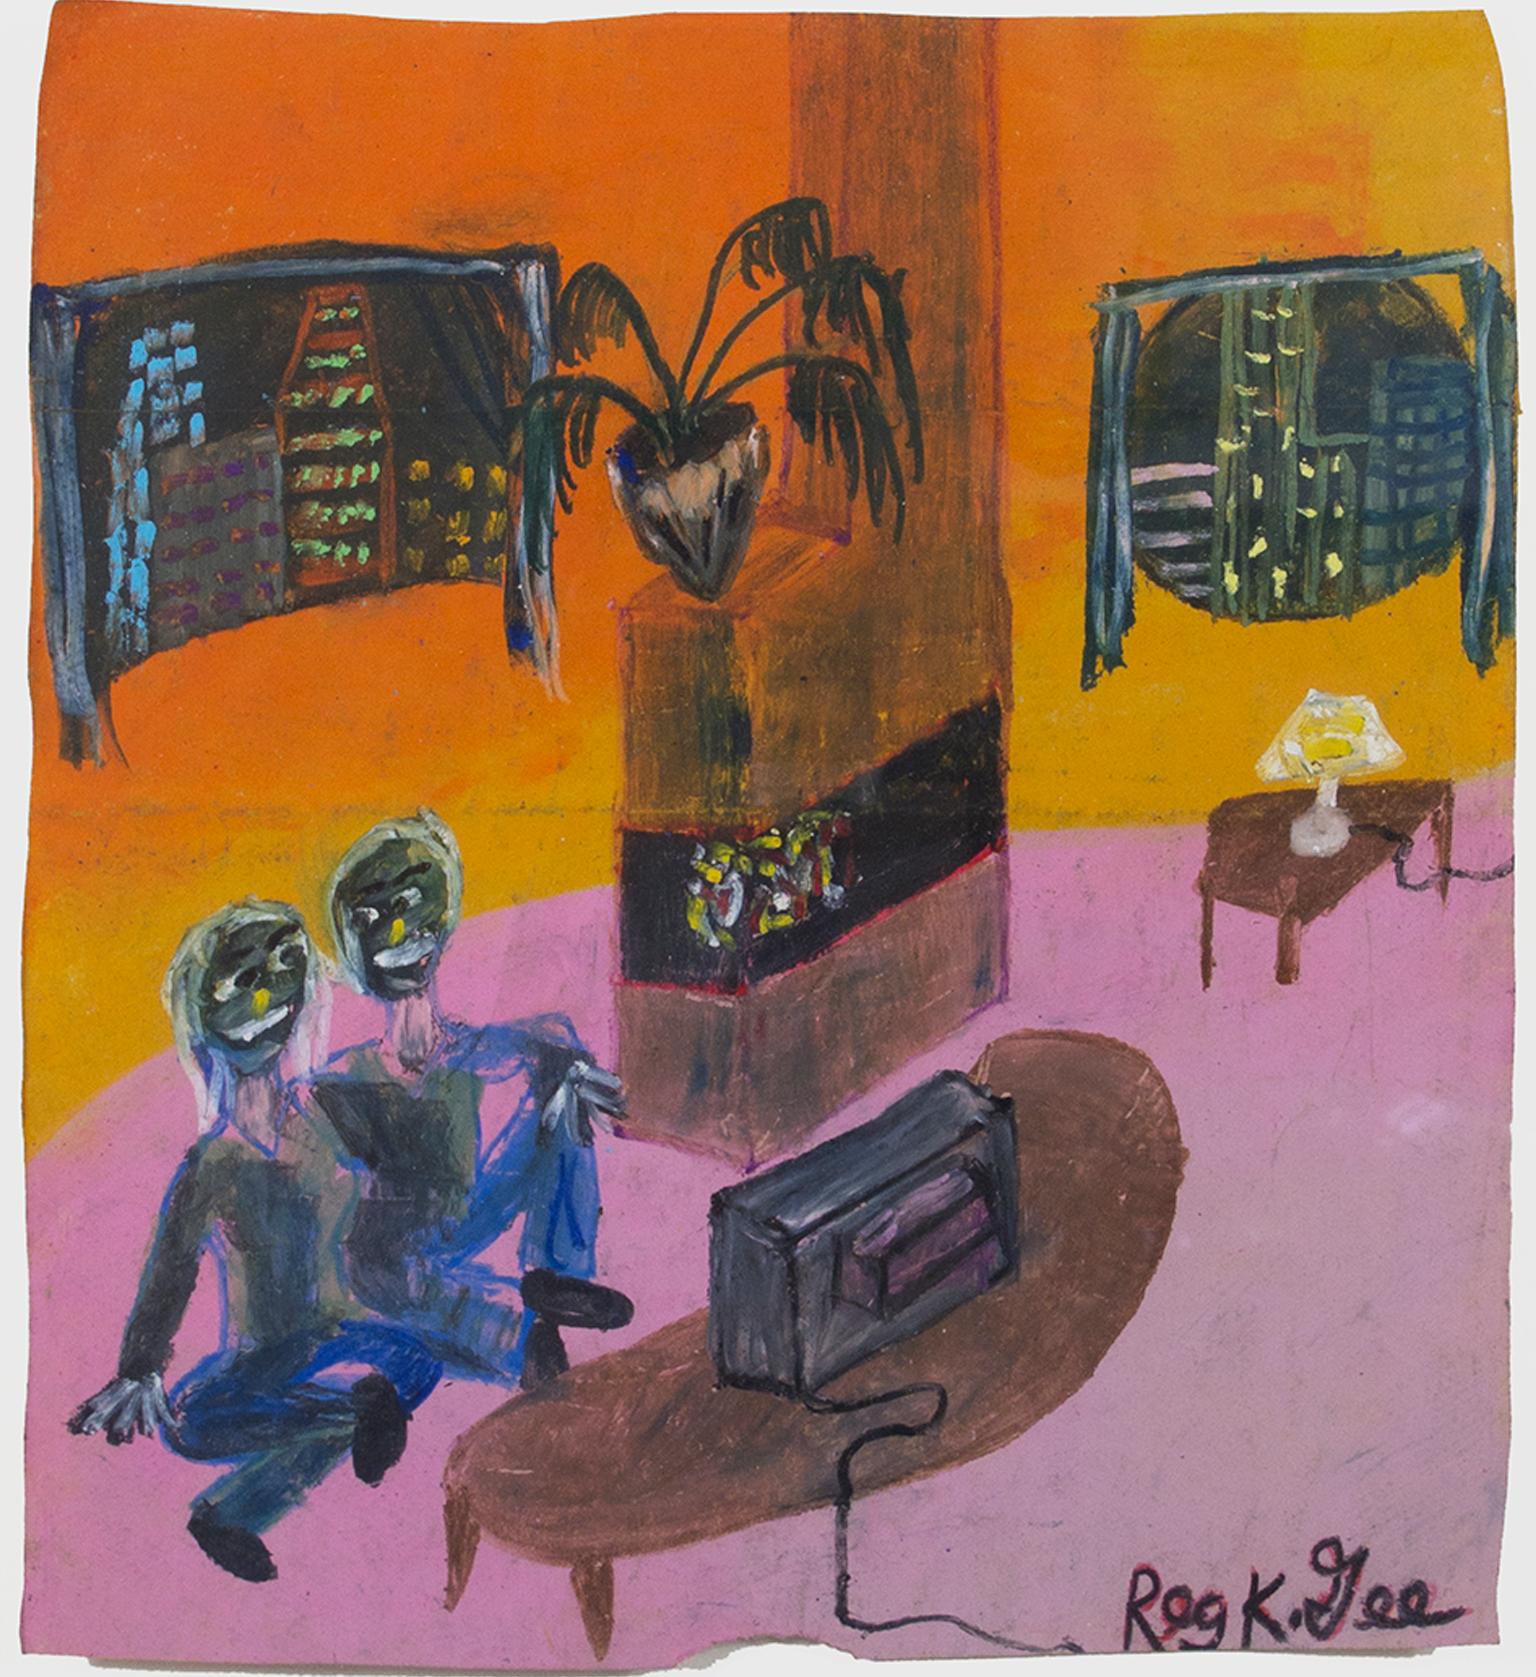 "Apartment B-10 (Couple Sitting on Floor Watching TV)" is an original oil pastel drawing on a grocery bag by Reginald K. Gee. It depicts two people sitting in their orange and pink apartment watching television. The artist signed the piece in the